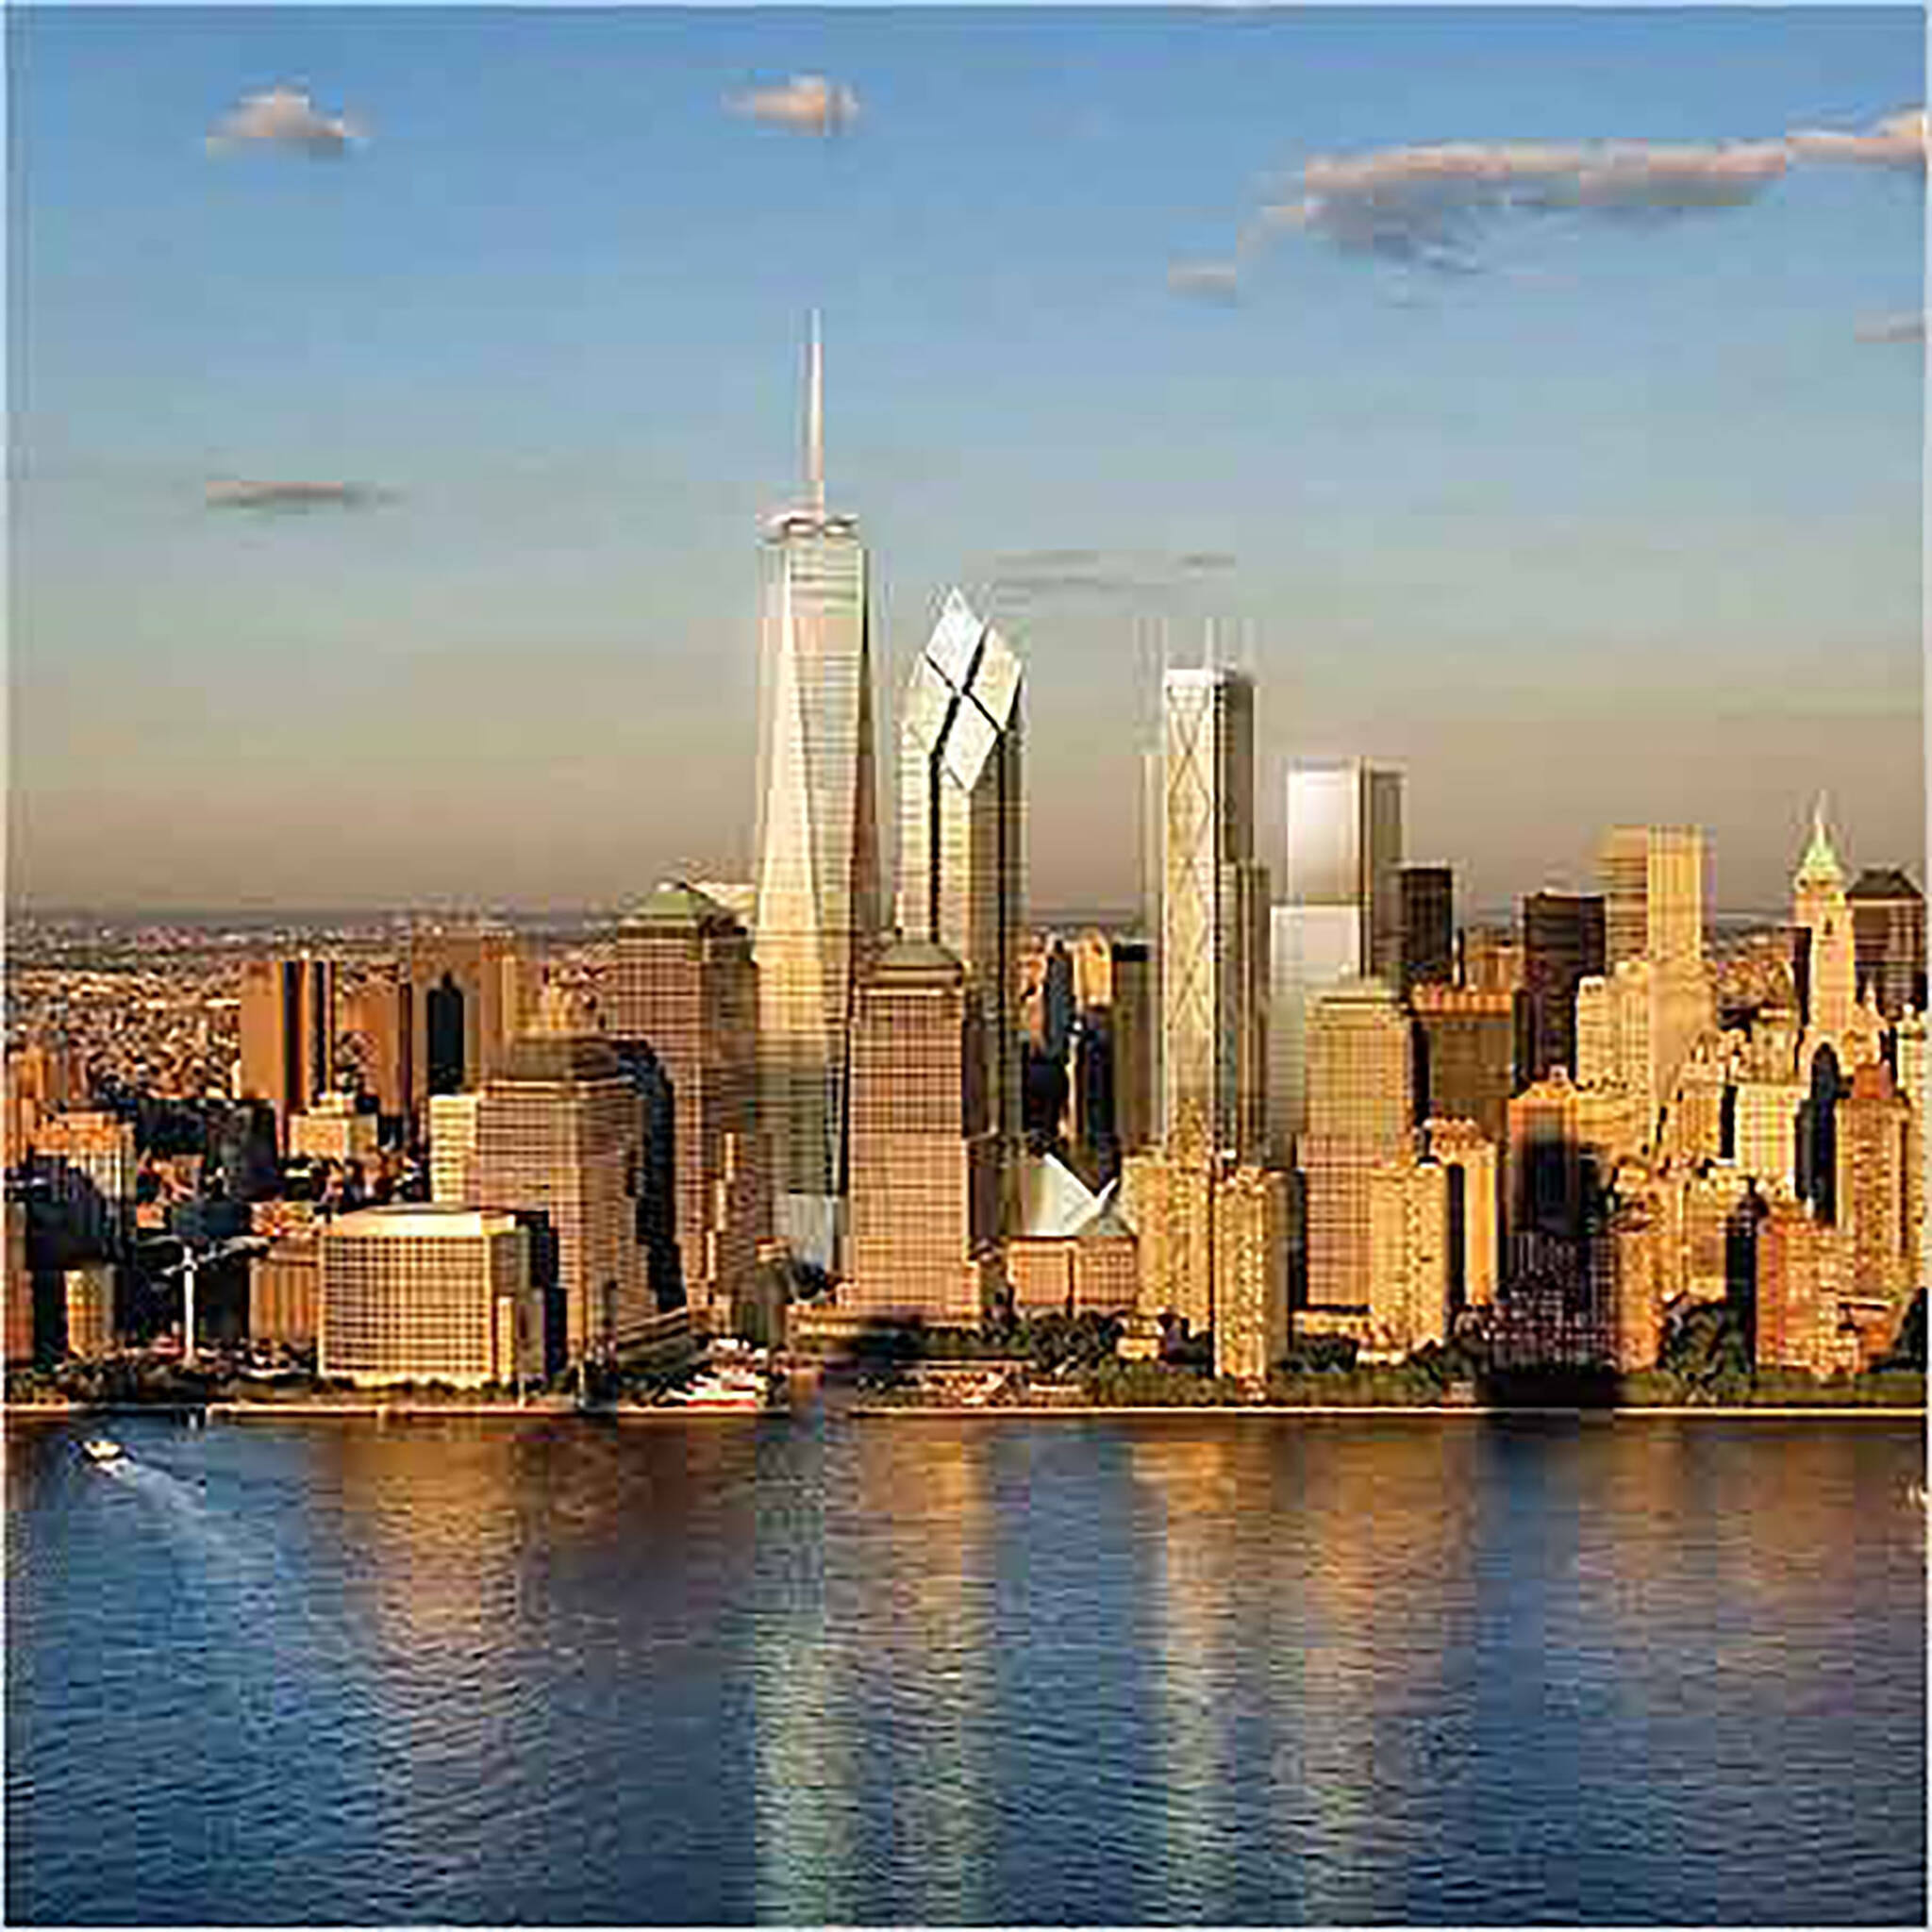 Aerial view of the new skyline of Lower Manhattan for the Rising: Rebuilding Ground Zero documentary Co-produced by Danny Forster and Steven Spielberg about the rebuilding of the World Trade Center site in the wake of 9/11.